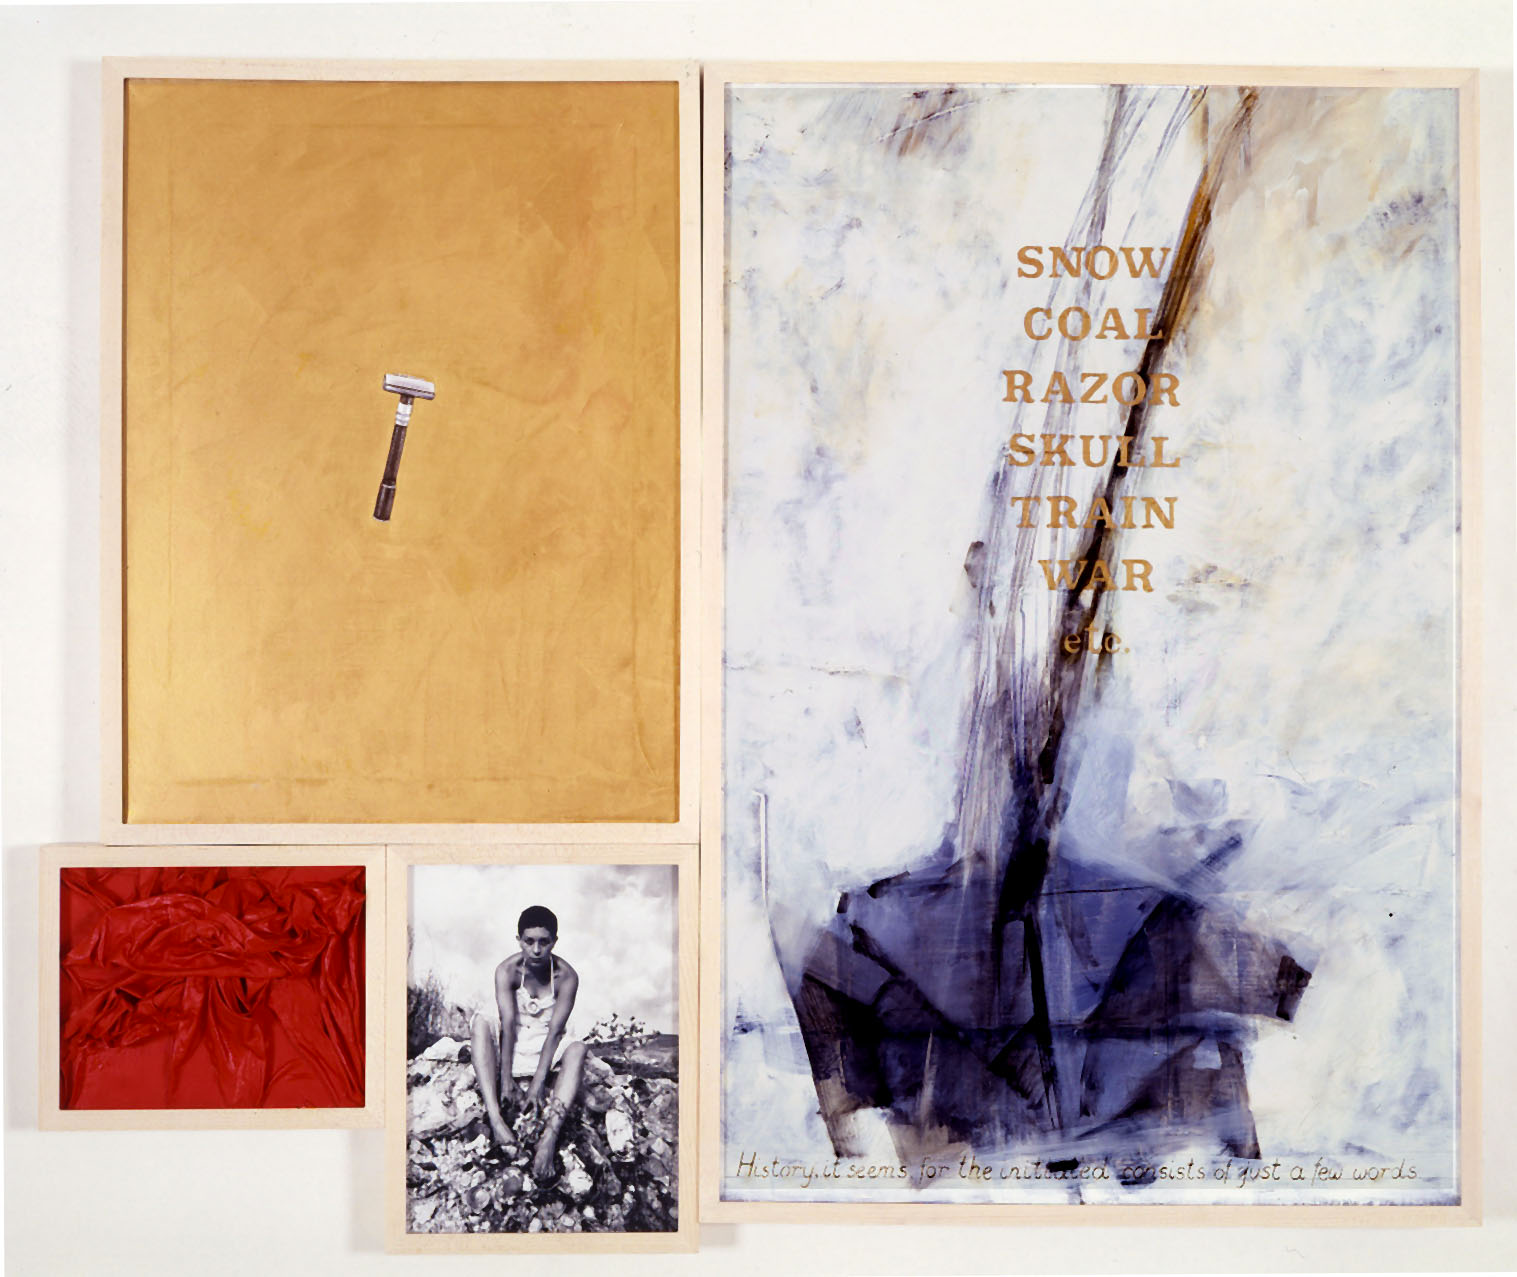 Four canvases of varying sizes with a razor on canvas on top left, English text and shadowy object on right, red fabric on middle left, and photograph of a seated woman on bottom left.